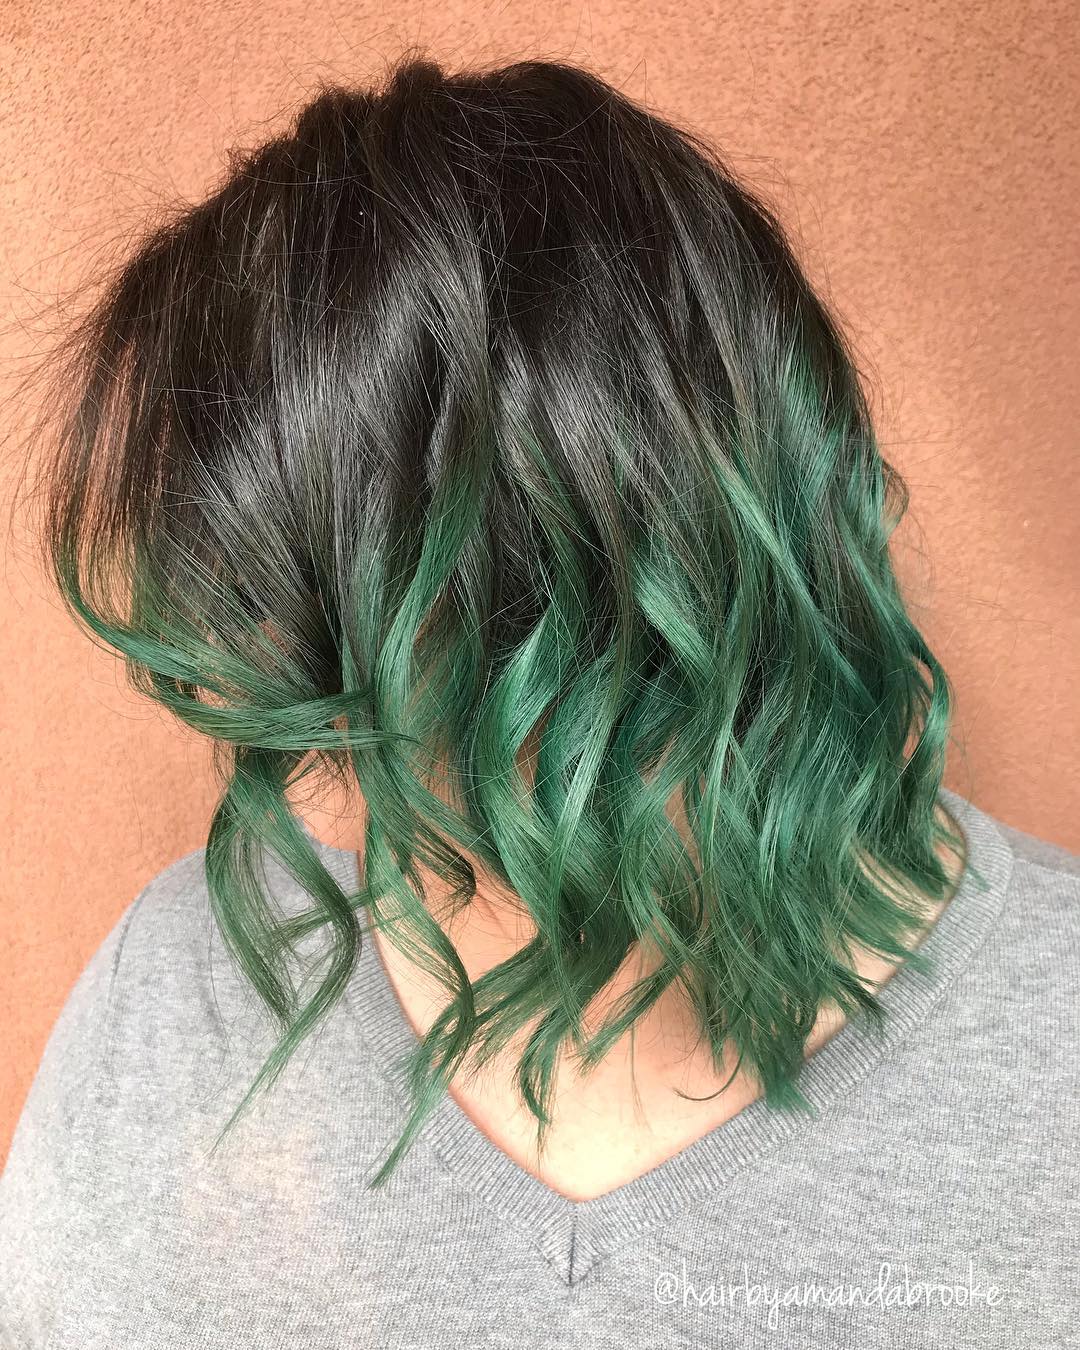 Hair transitioning in an ombre style from black to green